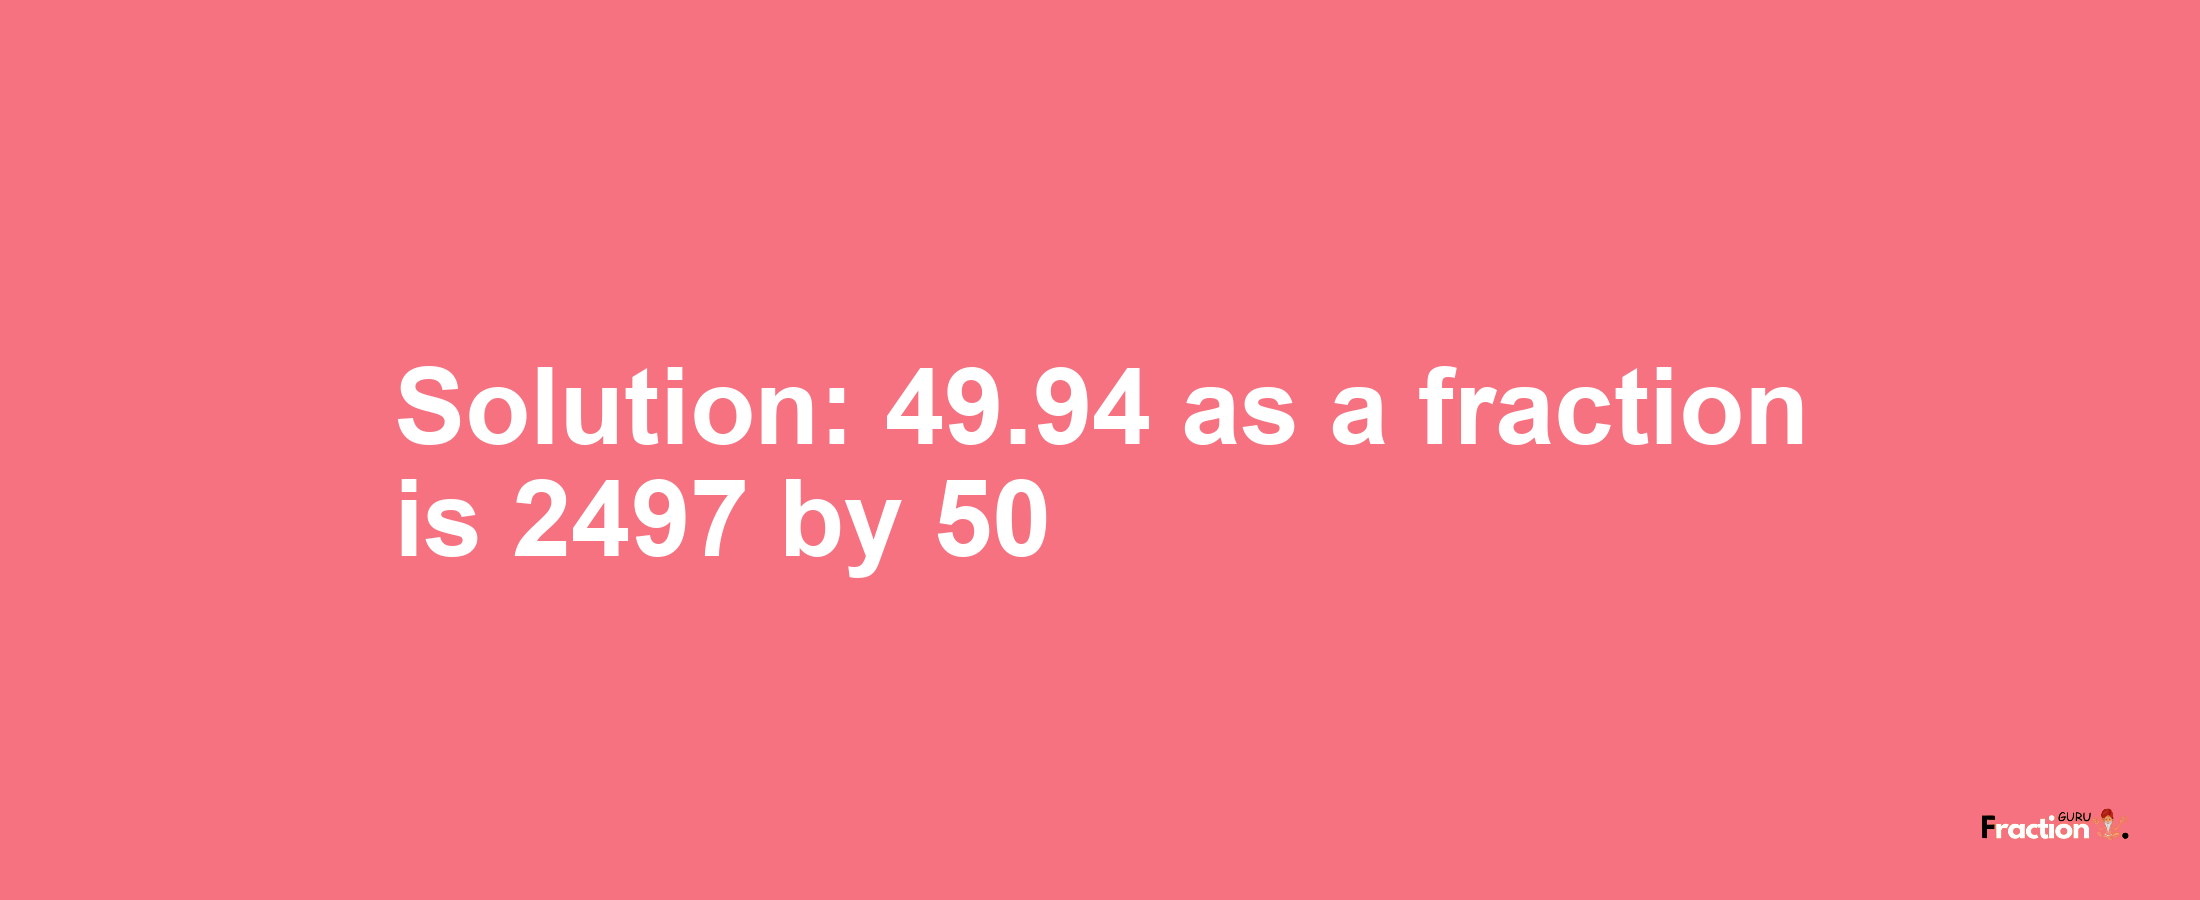 Solution:49.94 as a fraction is 2497/50